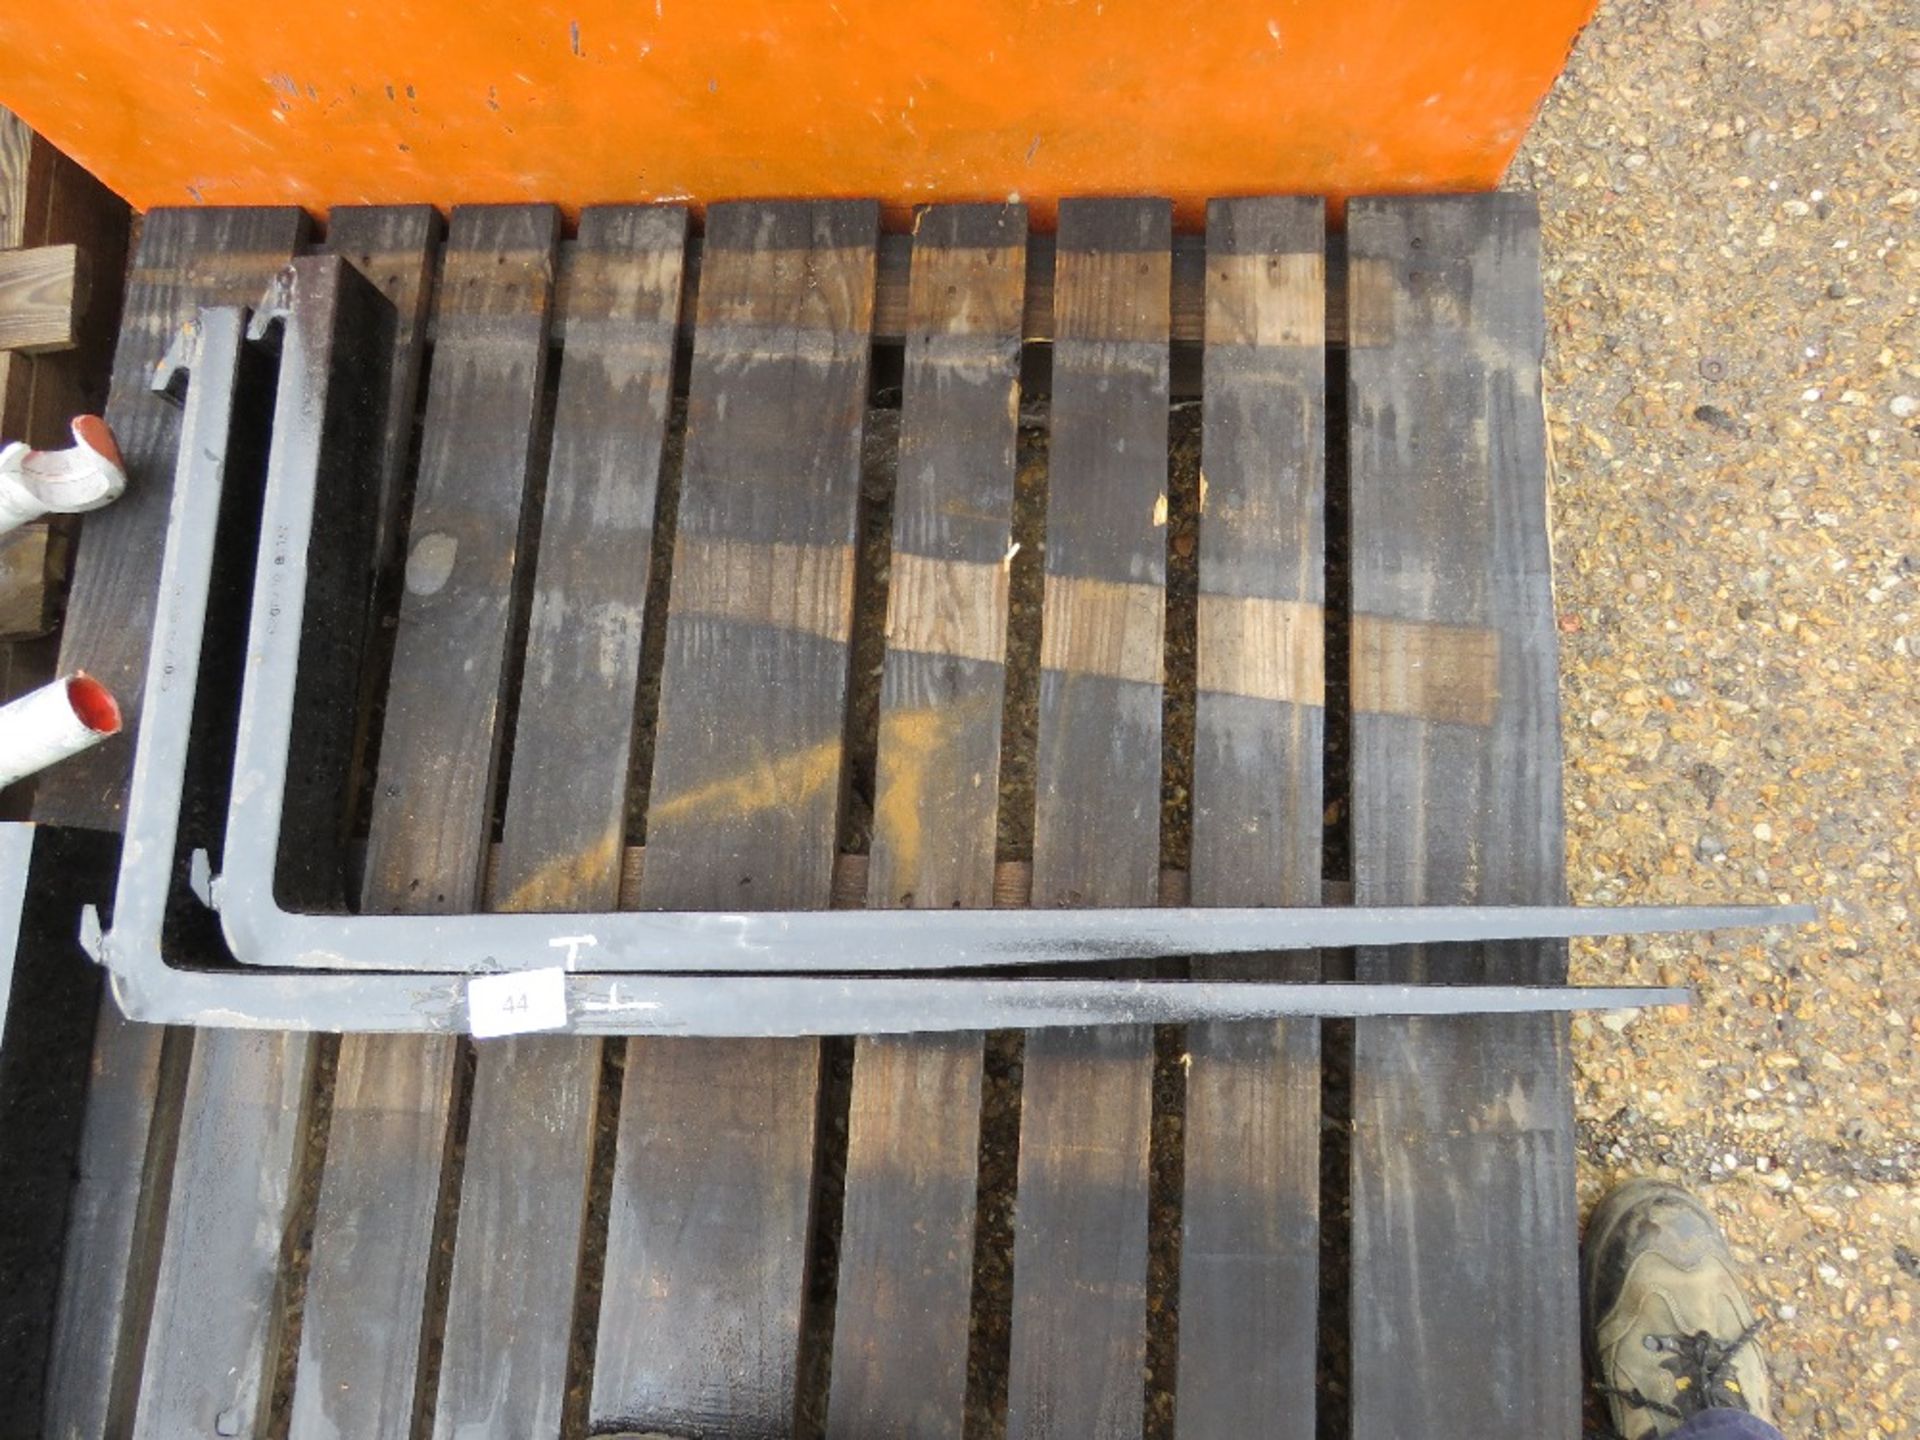 PAIR OF 1 M LONG FORKLIFT TINES (UNTESTED).